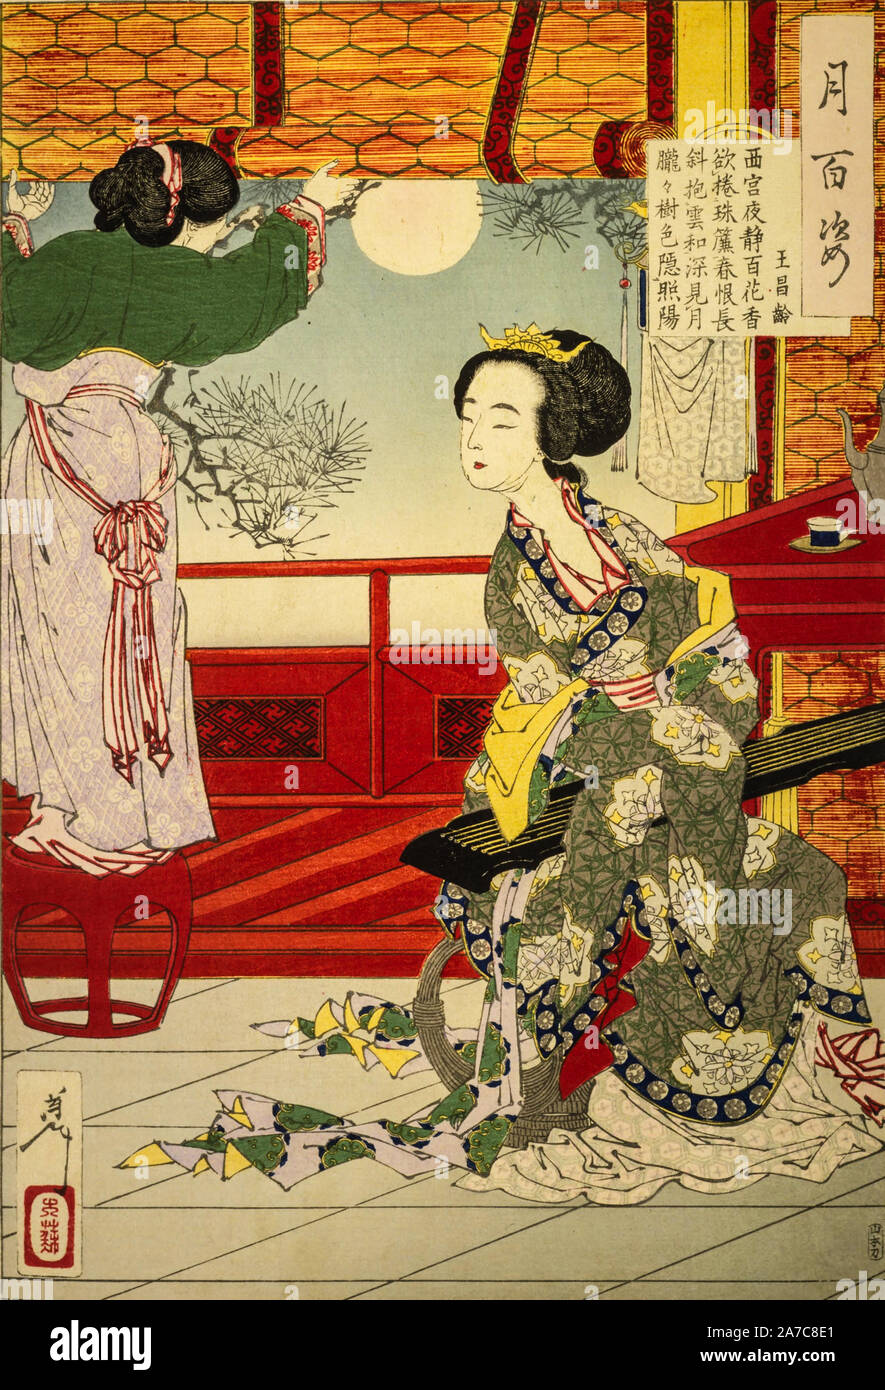 Chinese poem: The Night is Still and a Hundred Flowers are Fragrant in the Western Palace/ She Orders the Screen to be Rolled up, Regretting the Passing of Spring/ With the Yunhe across her Lap she Gazes at the Moon/ The Colors of the Trees are Hazy in the Indistinct Moonlight - Wang Changling, woodblock prints by Tsukioka Yoshitoshi. Stock Photo